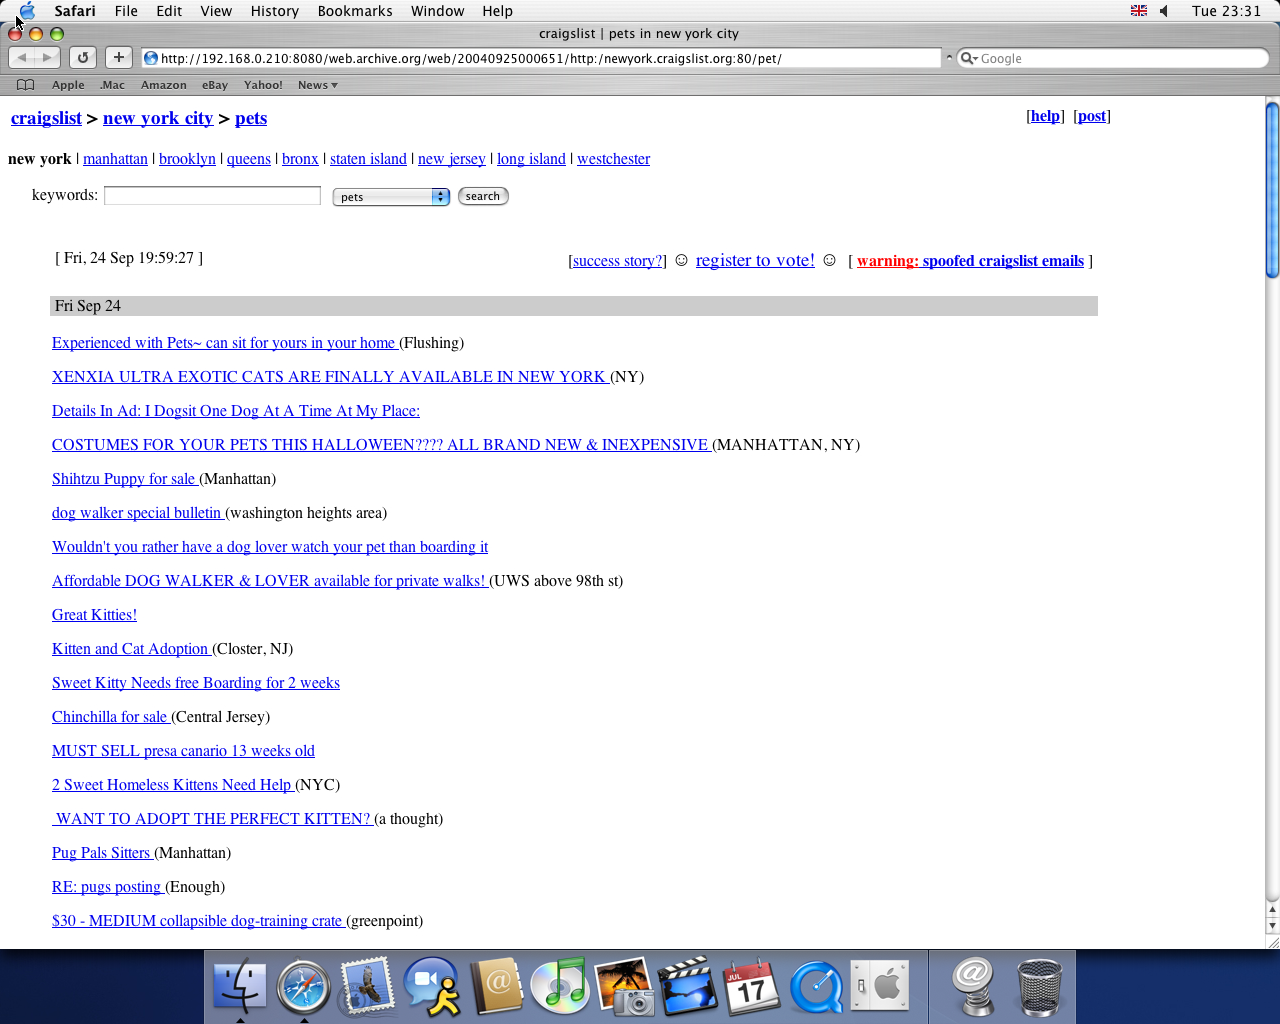 OS X 10.3 PPC with Safari 1.1 displaying a page from craigslist archived at September 25, 2004 at 00:06:51